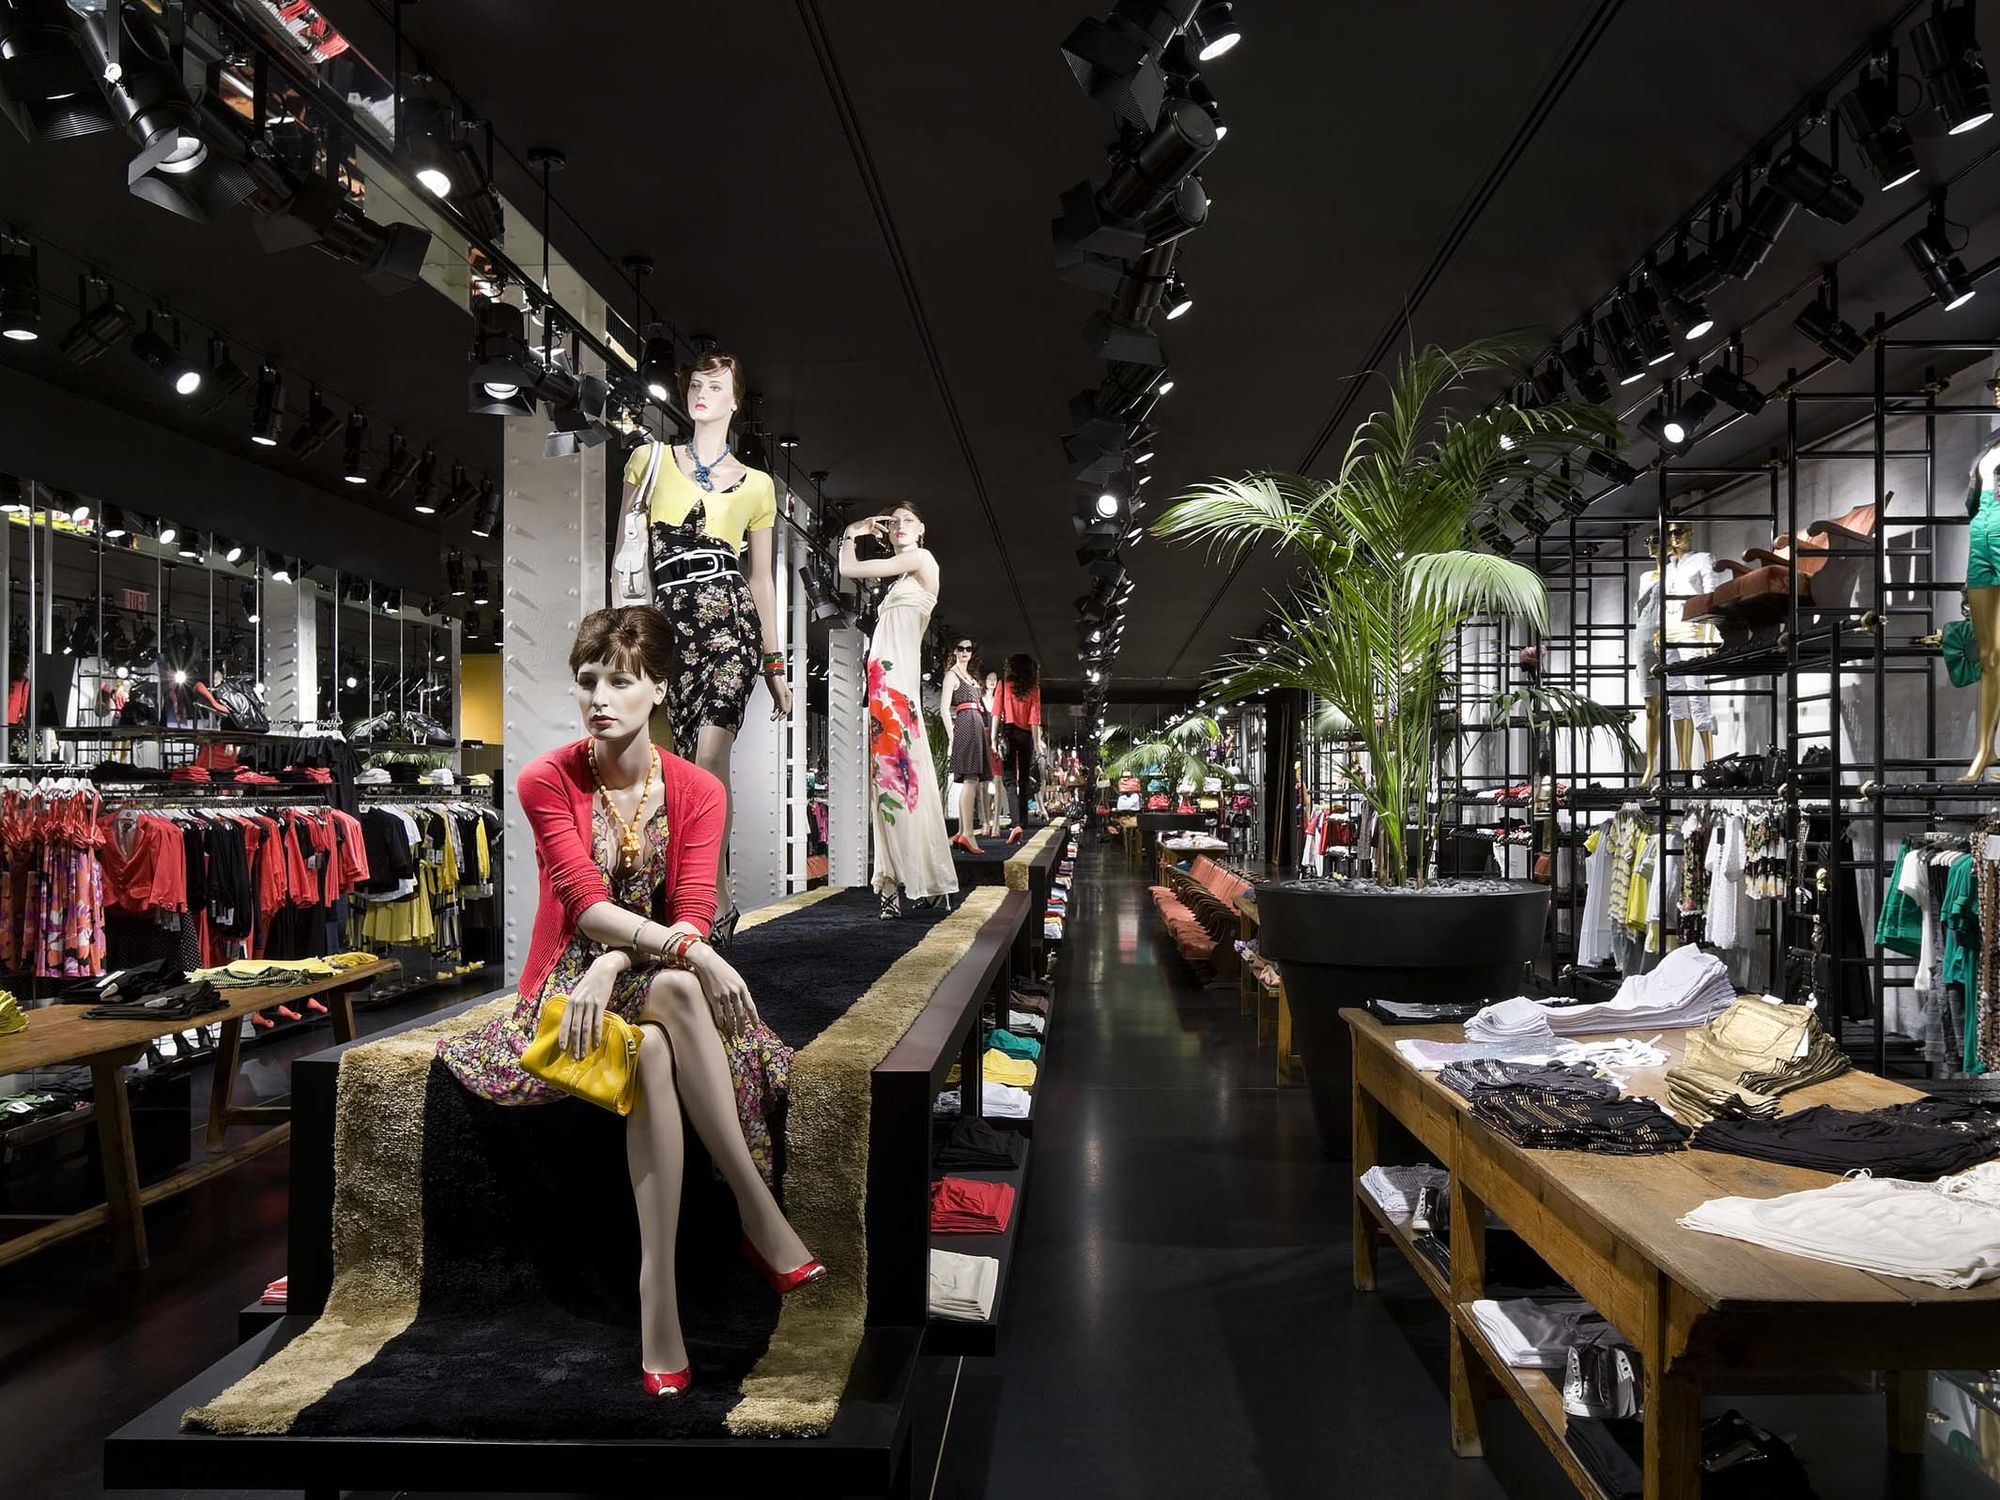 Gucci opens store in Ross Park Mall